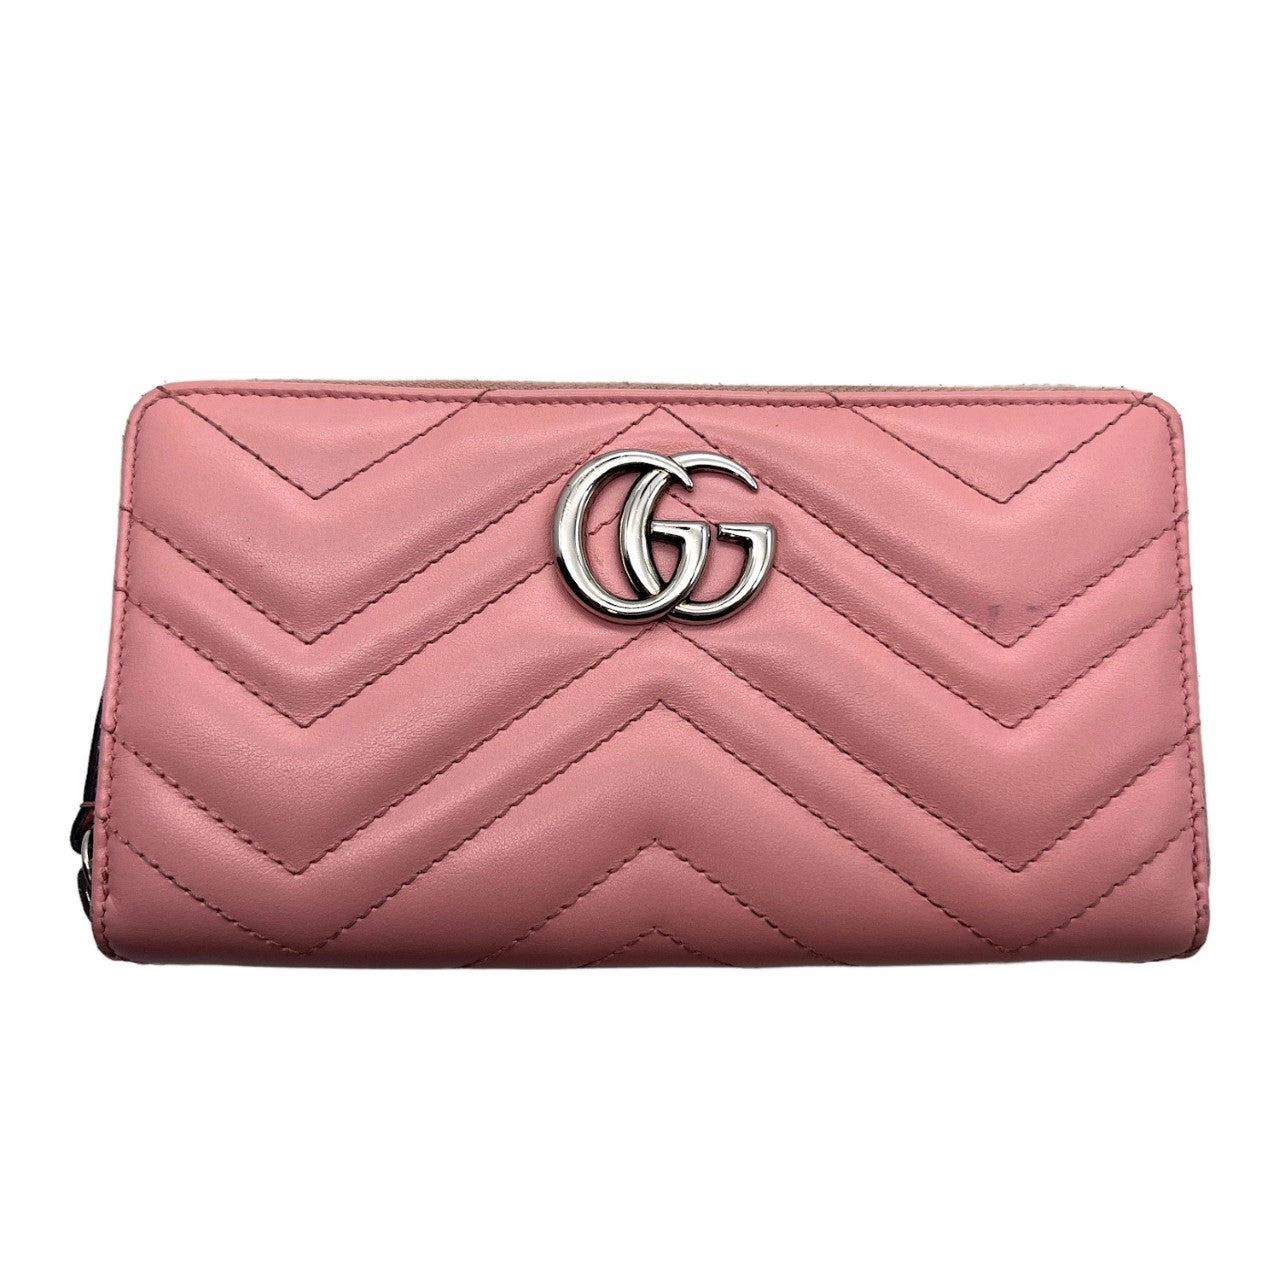 Gucci Pink Marmont GG Wallet - TheRelux.com